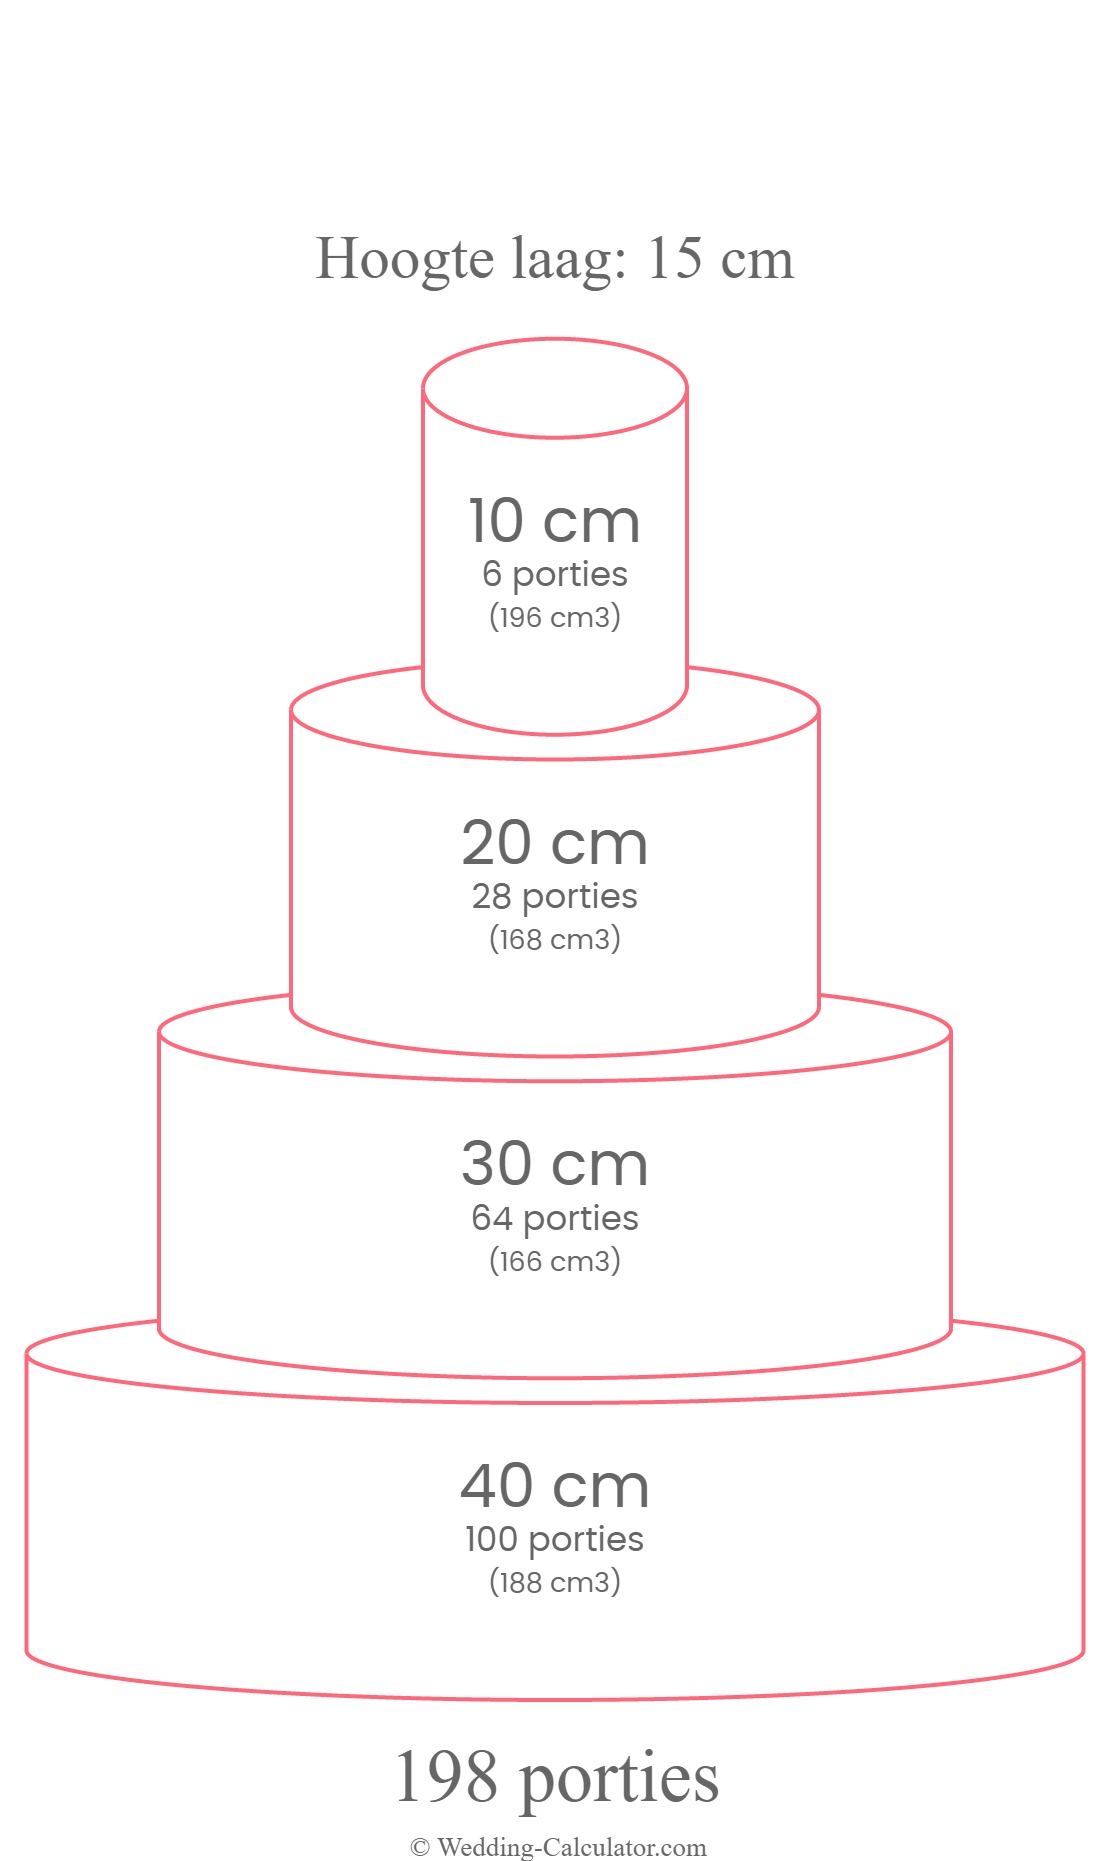 Servings chart for a round 4 tier wedding cake for 198 servings with 40 cm, 30 cm, 20 cm & 10 cm diameter tiers